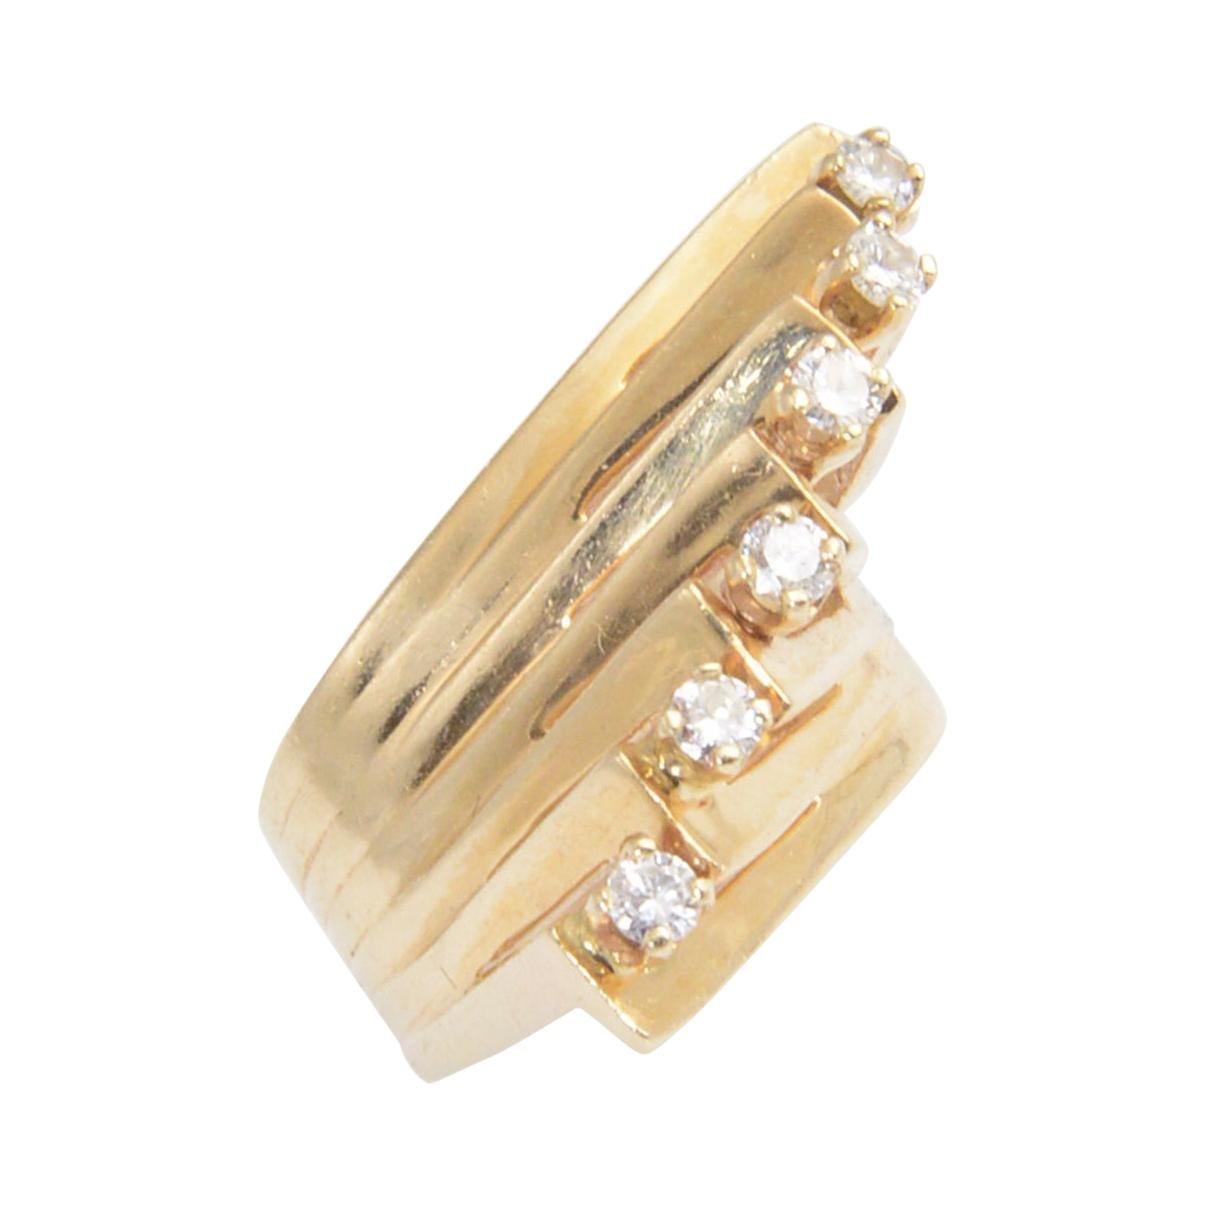 1970s Modernist Geometric Three Dimensional Diamond Yellow Gold Ring For Sale